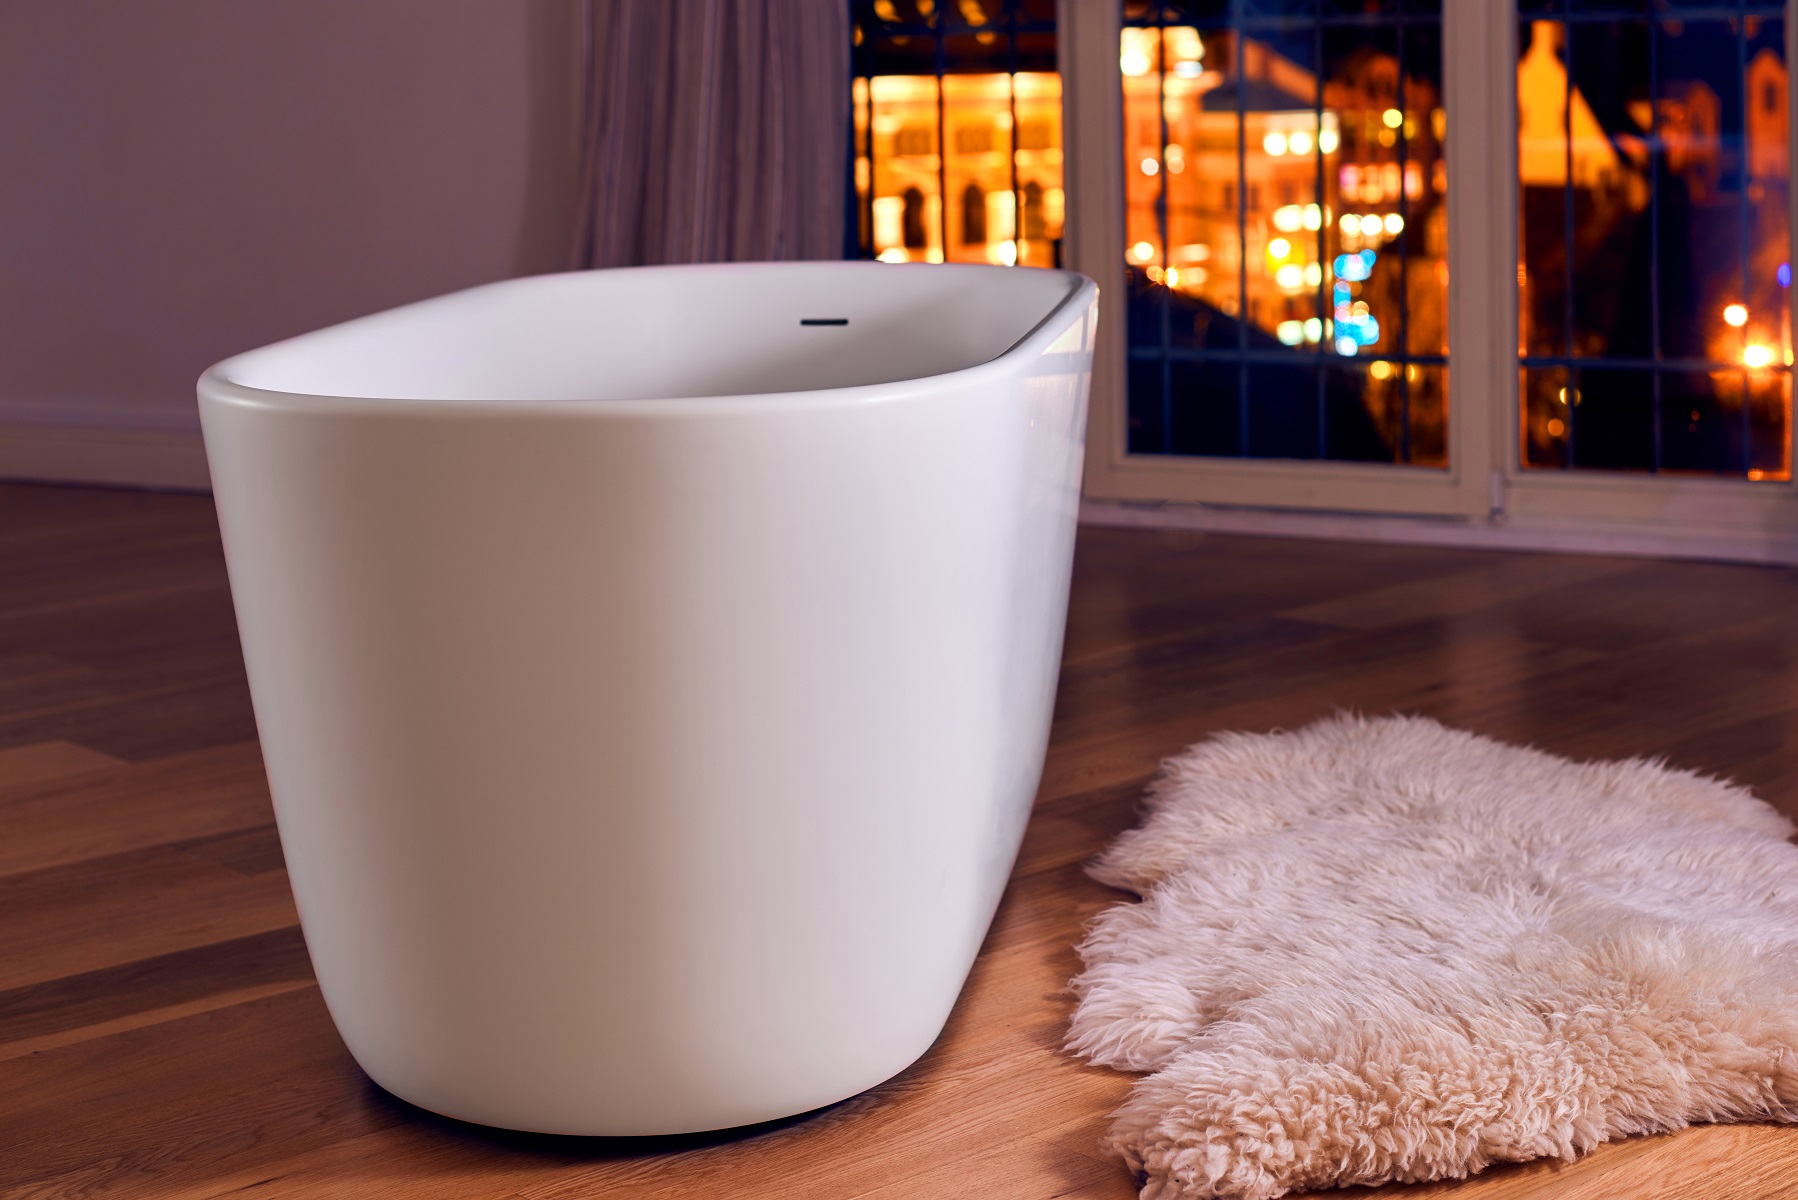 ᐈ 10 Small Freestanding Bath Tub, What Is The Smallest Size Bathtub Available